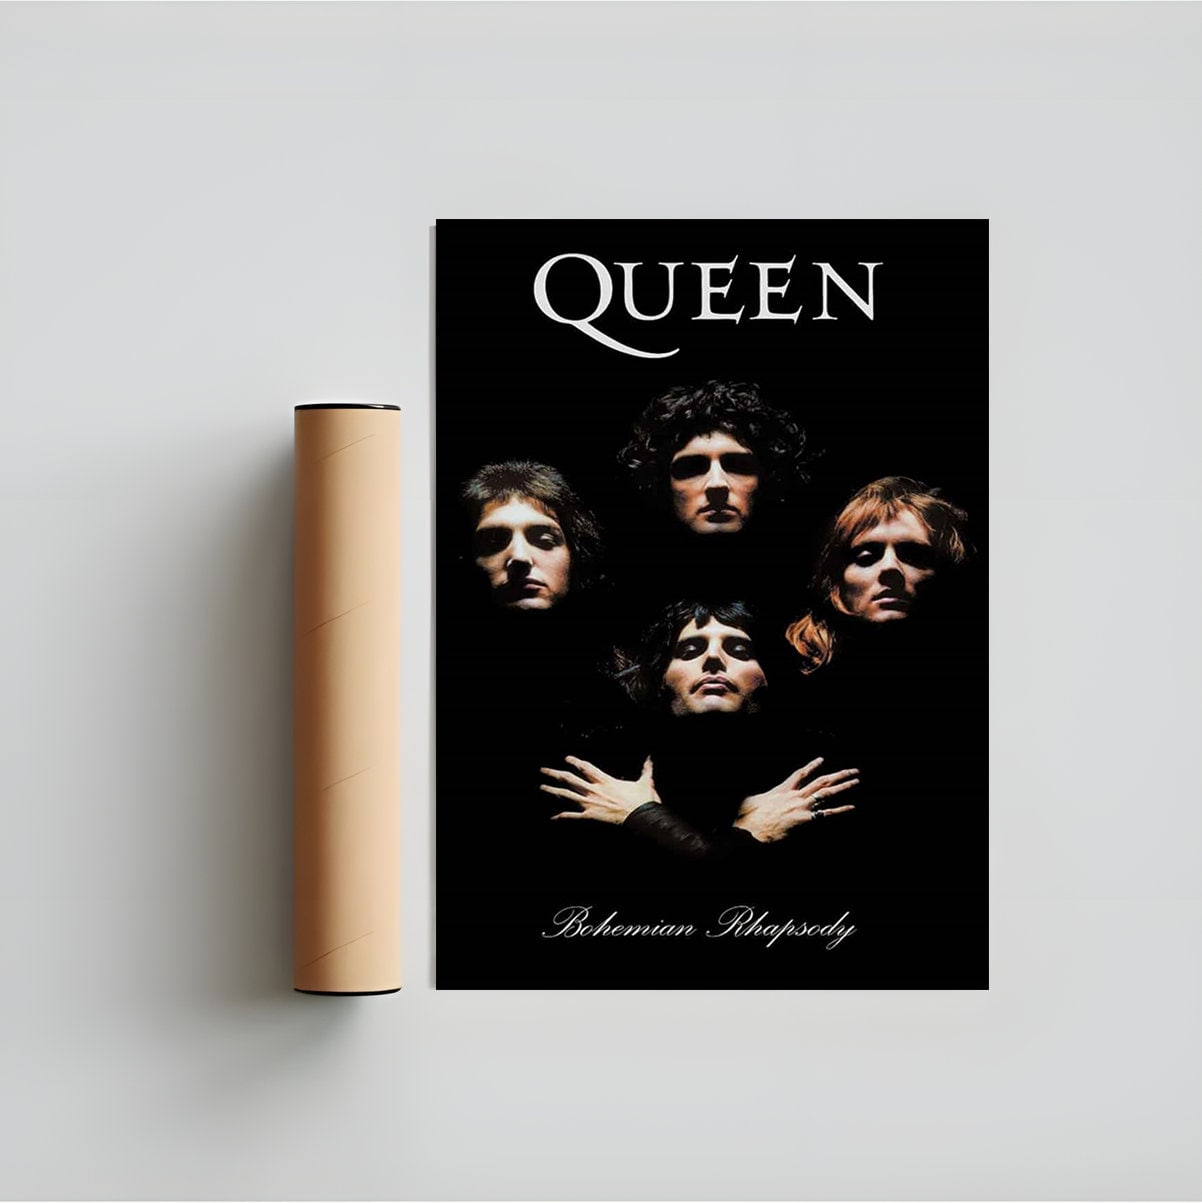 Queen Poster / Metal Band Poster / Vintage poster / Retro Poster